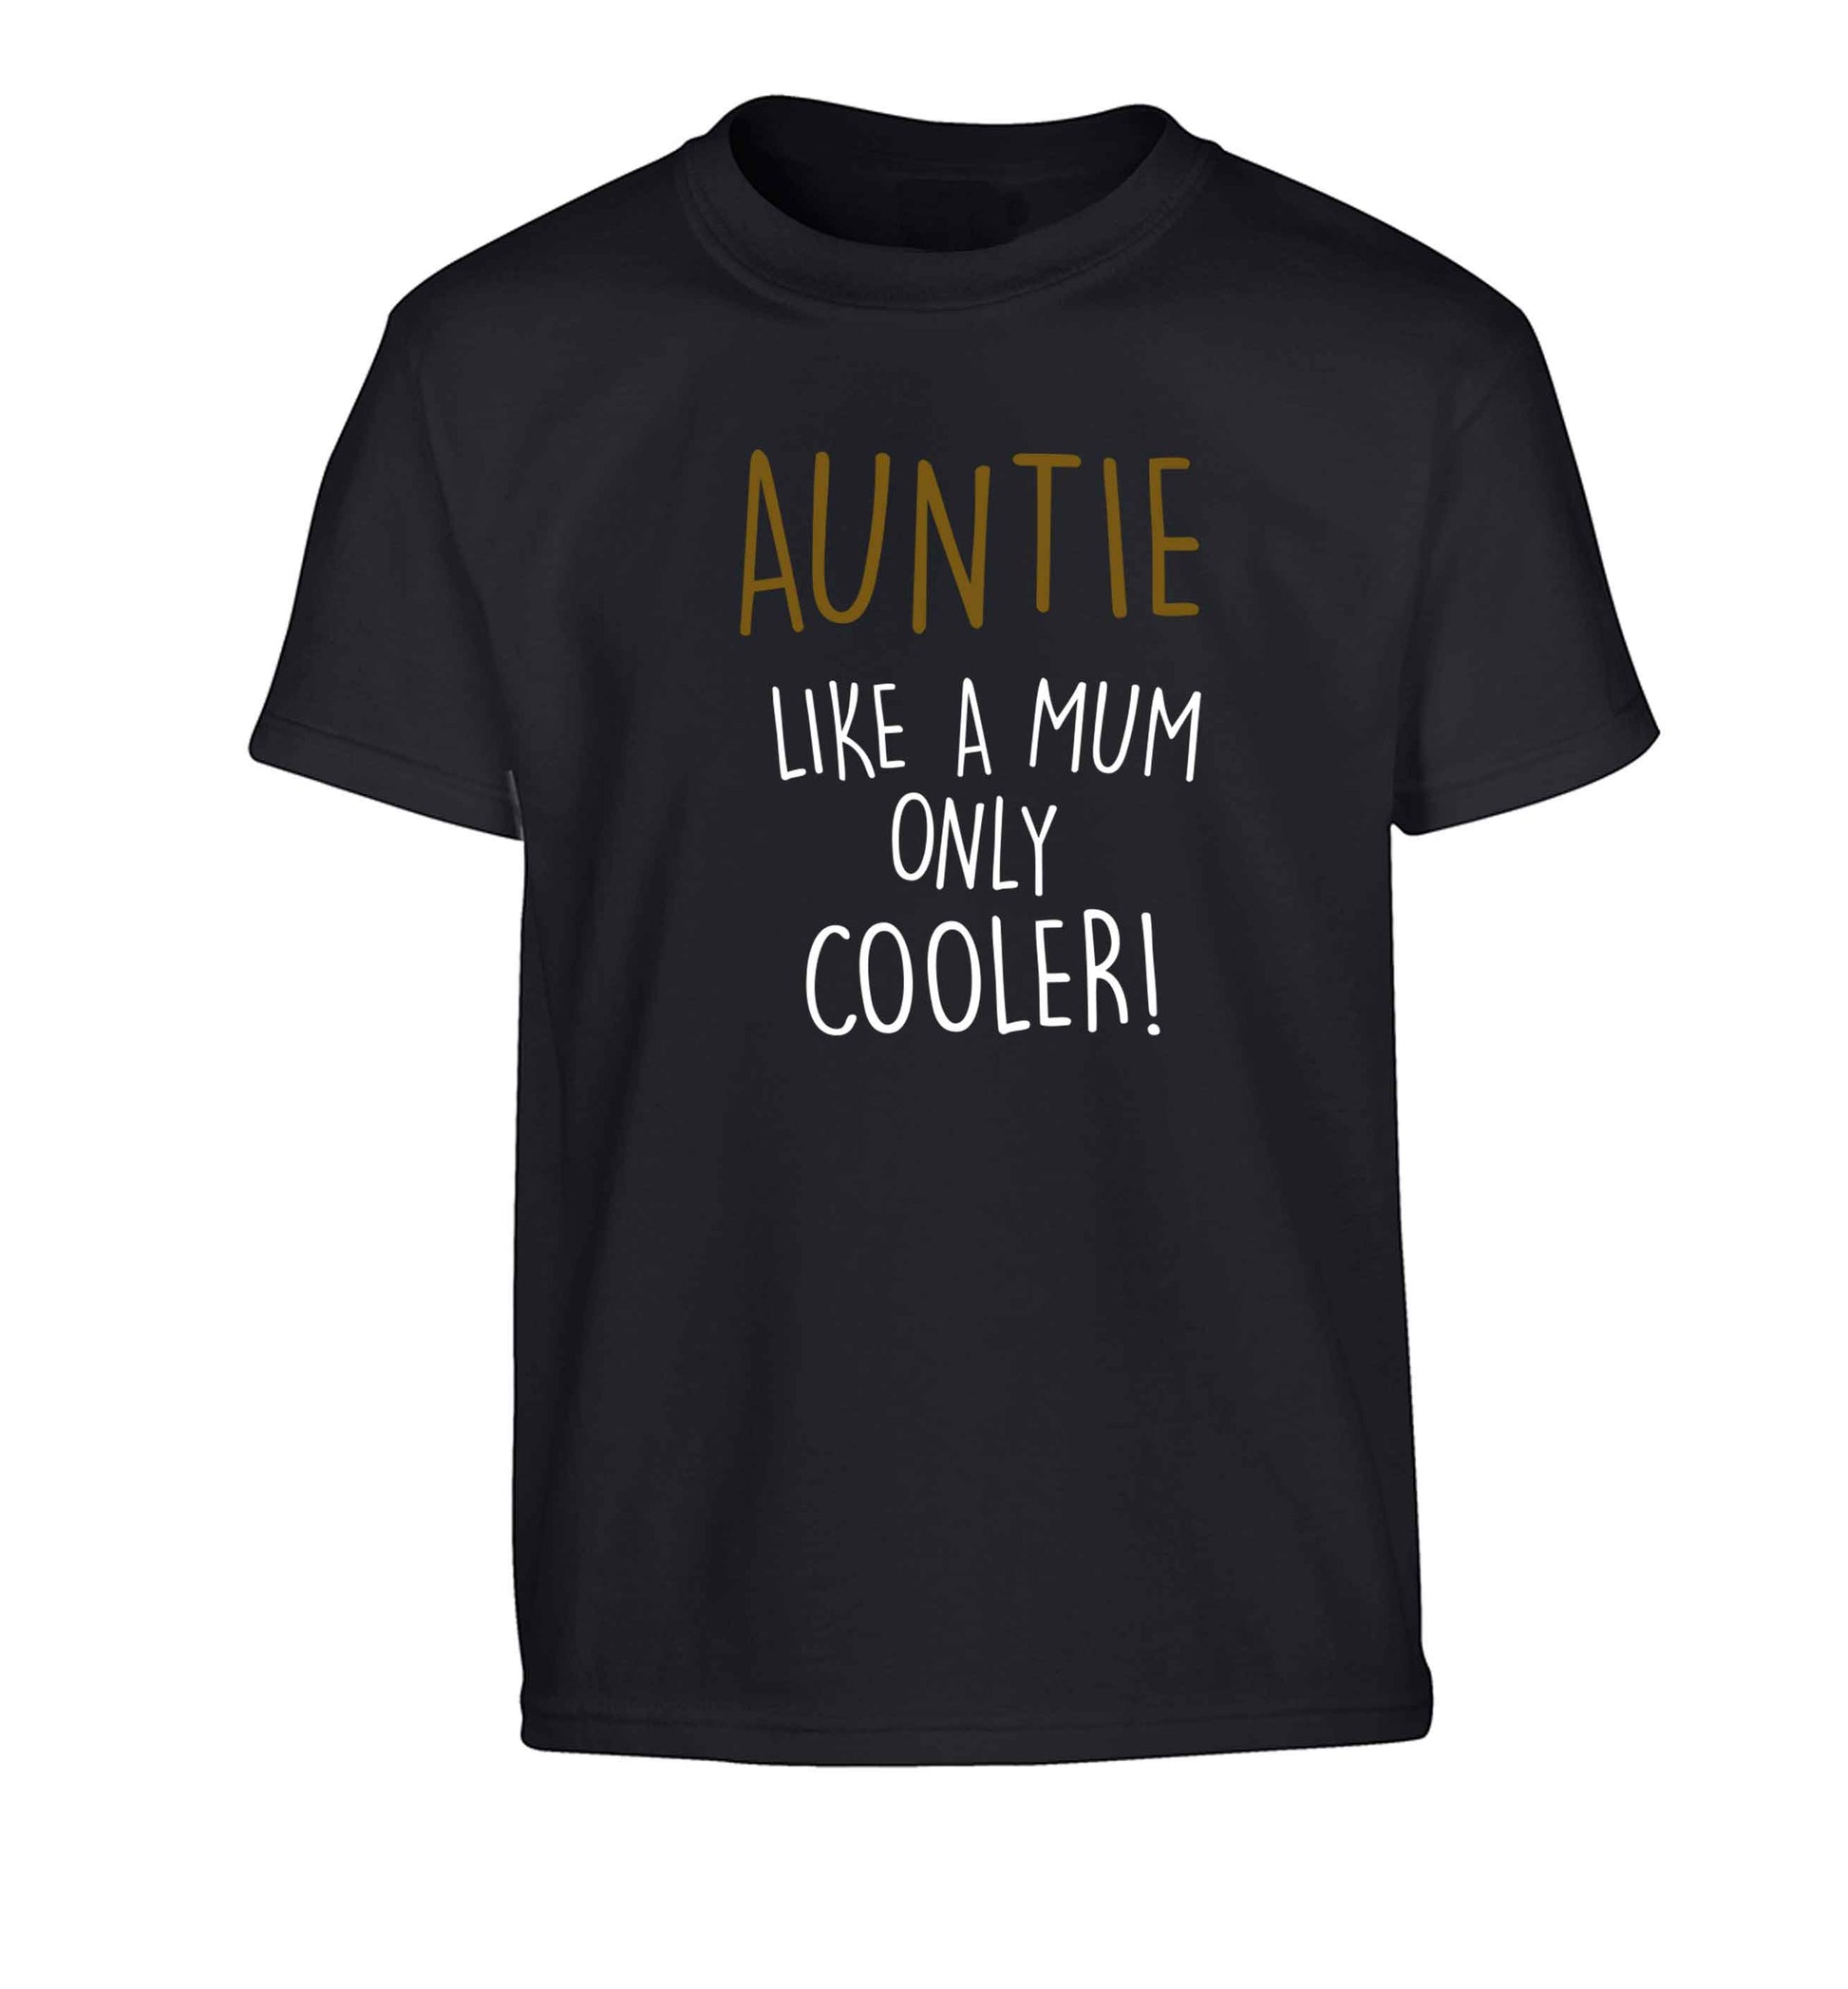 Auntie like a mum only cooler Children's black Tshirt 12-13 Years